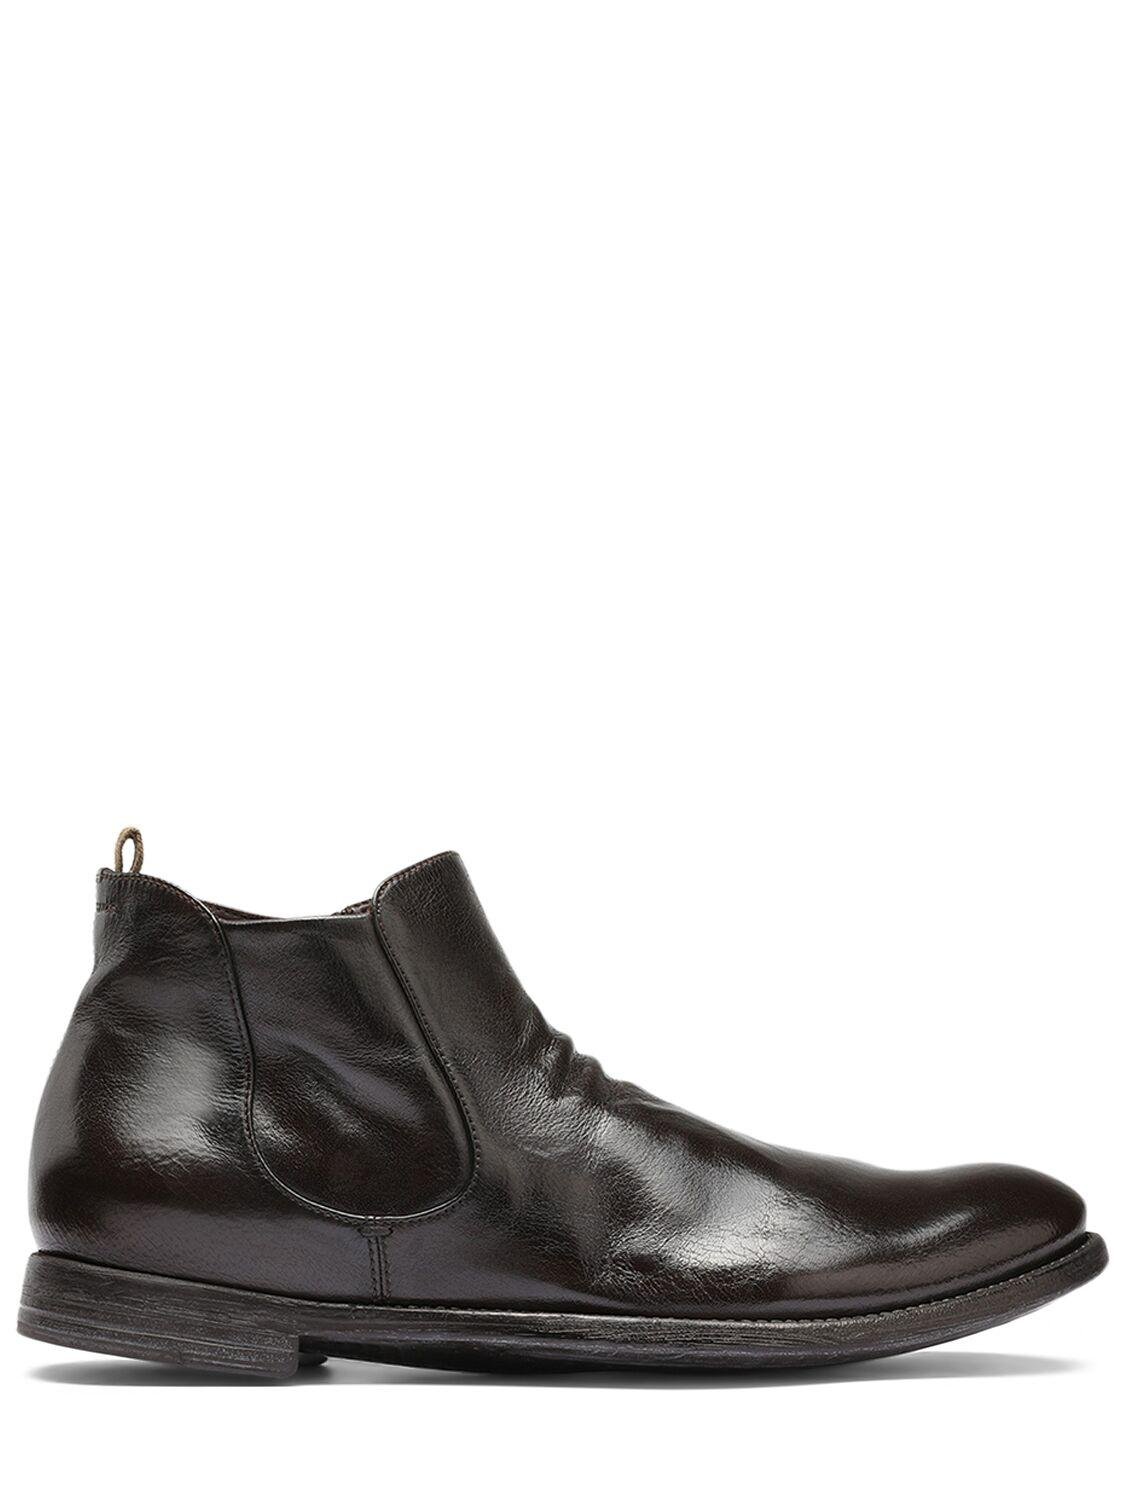 Ingnis Leather Ankle Boots by OFFICINE CREATIVE